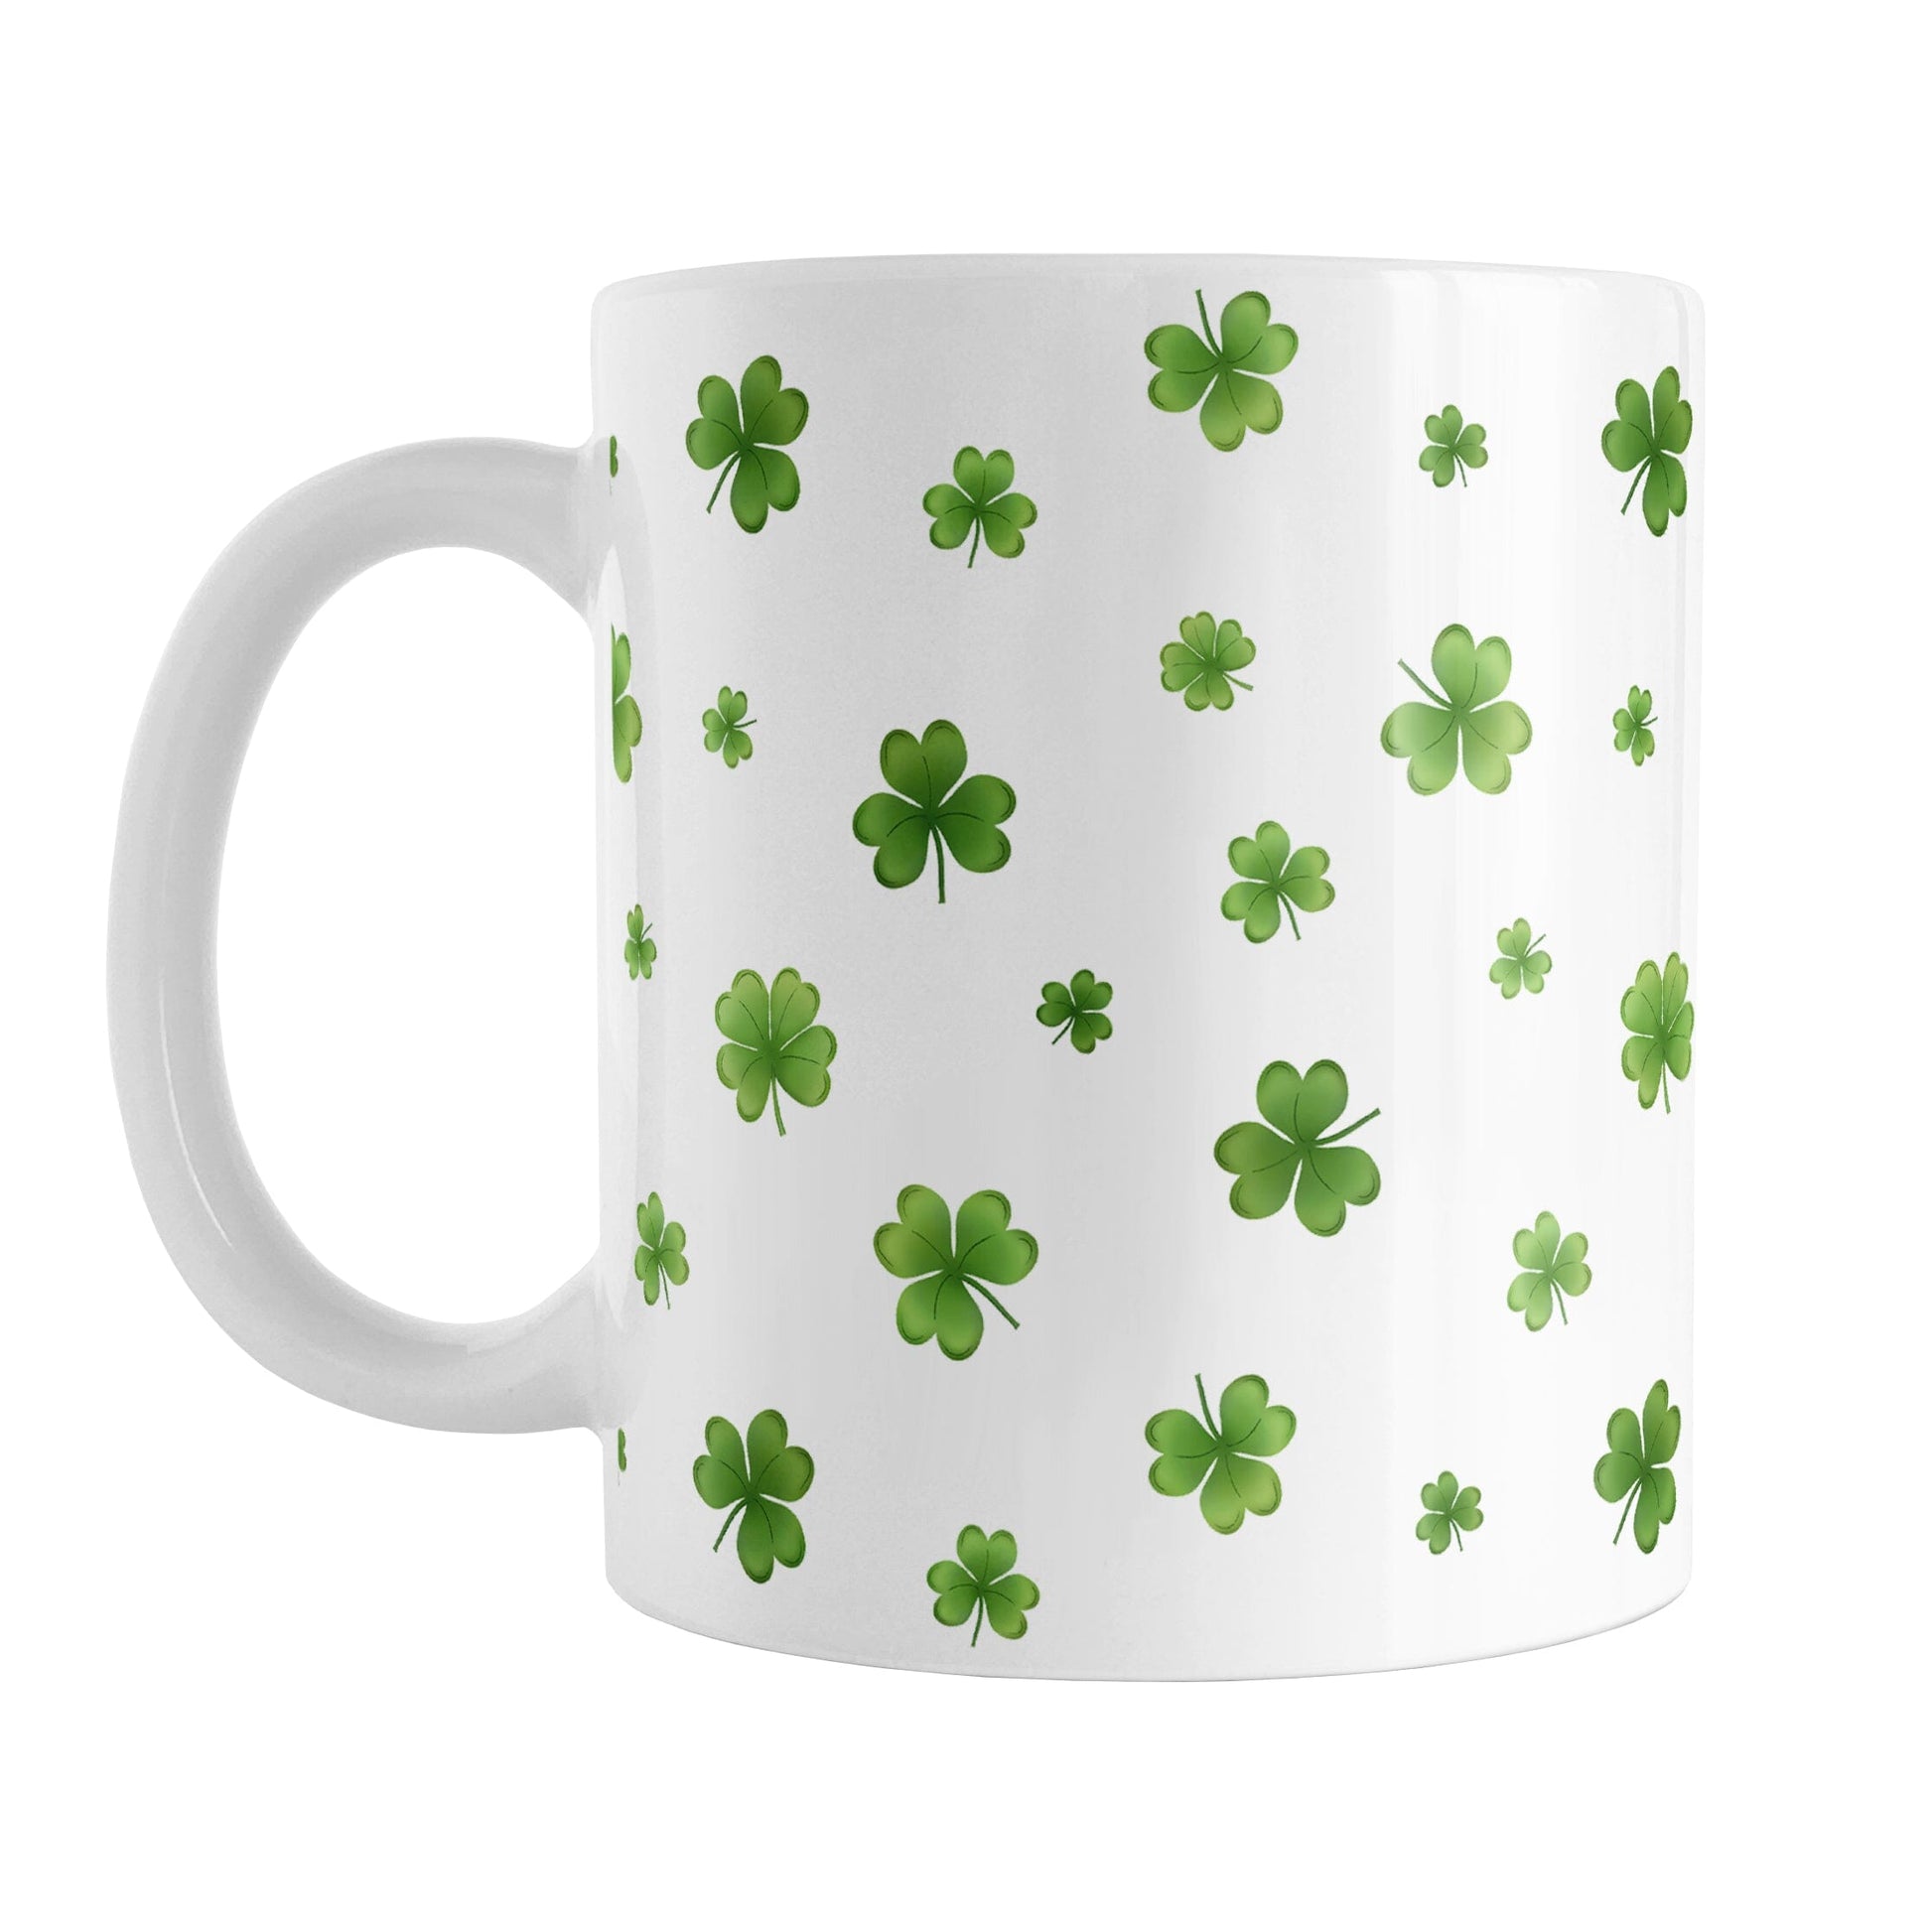 Dainty Shamrocks and Clovers Mug (11oz) at Amy's Coffee Mugs. A ceramic coffee mug designed with hand-drawn green shamrocks and 4-leaf clovers in a dainty minimalist pattern that wraps around the mug up to the handle.